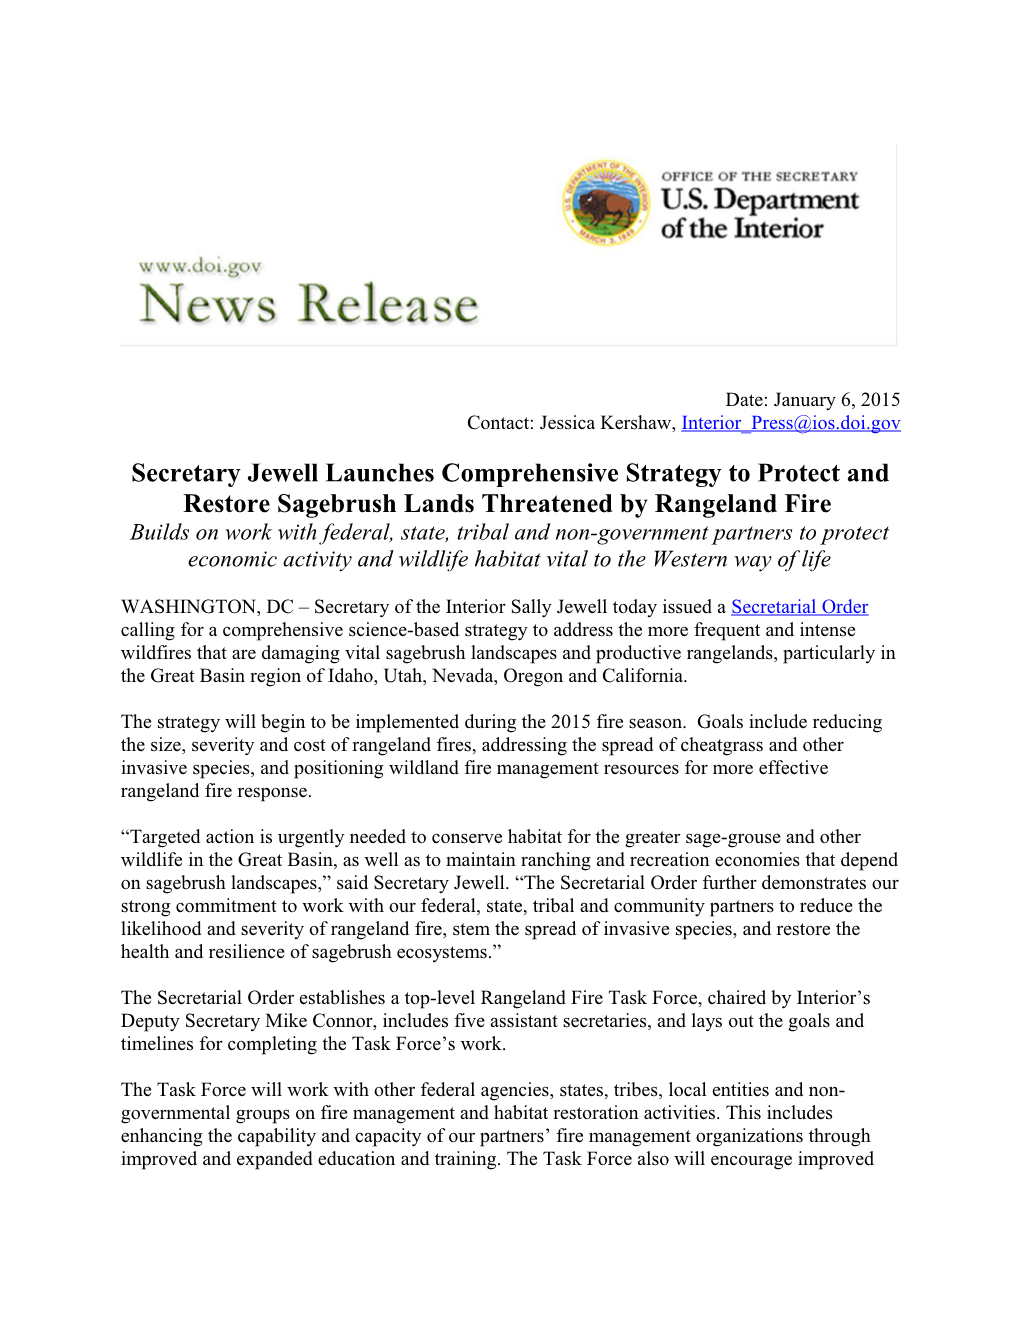 Secretary Jewell Launches Comprehensivestrategy to Protect and Restore Sagebrush Lands